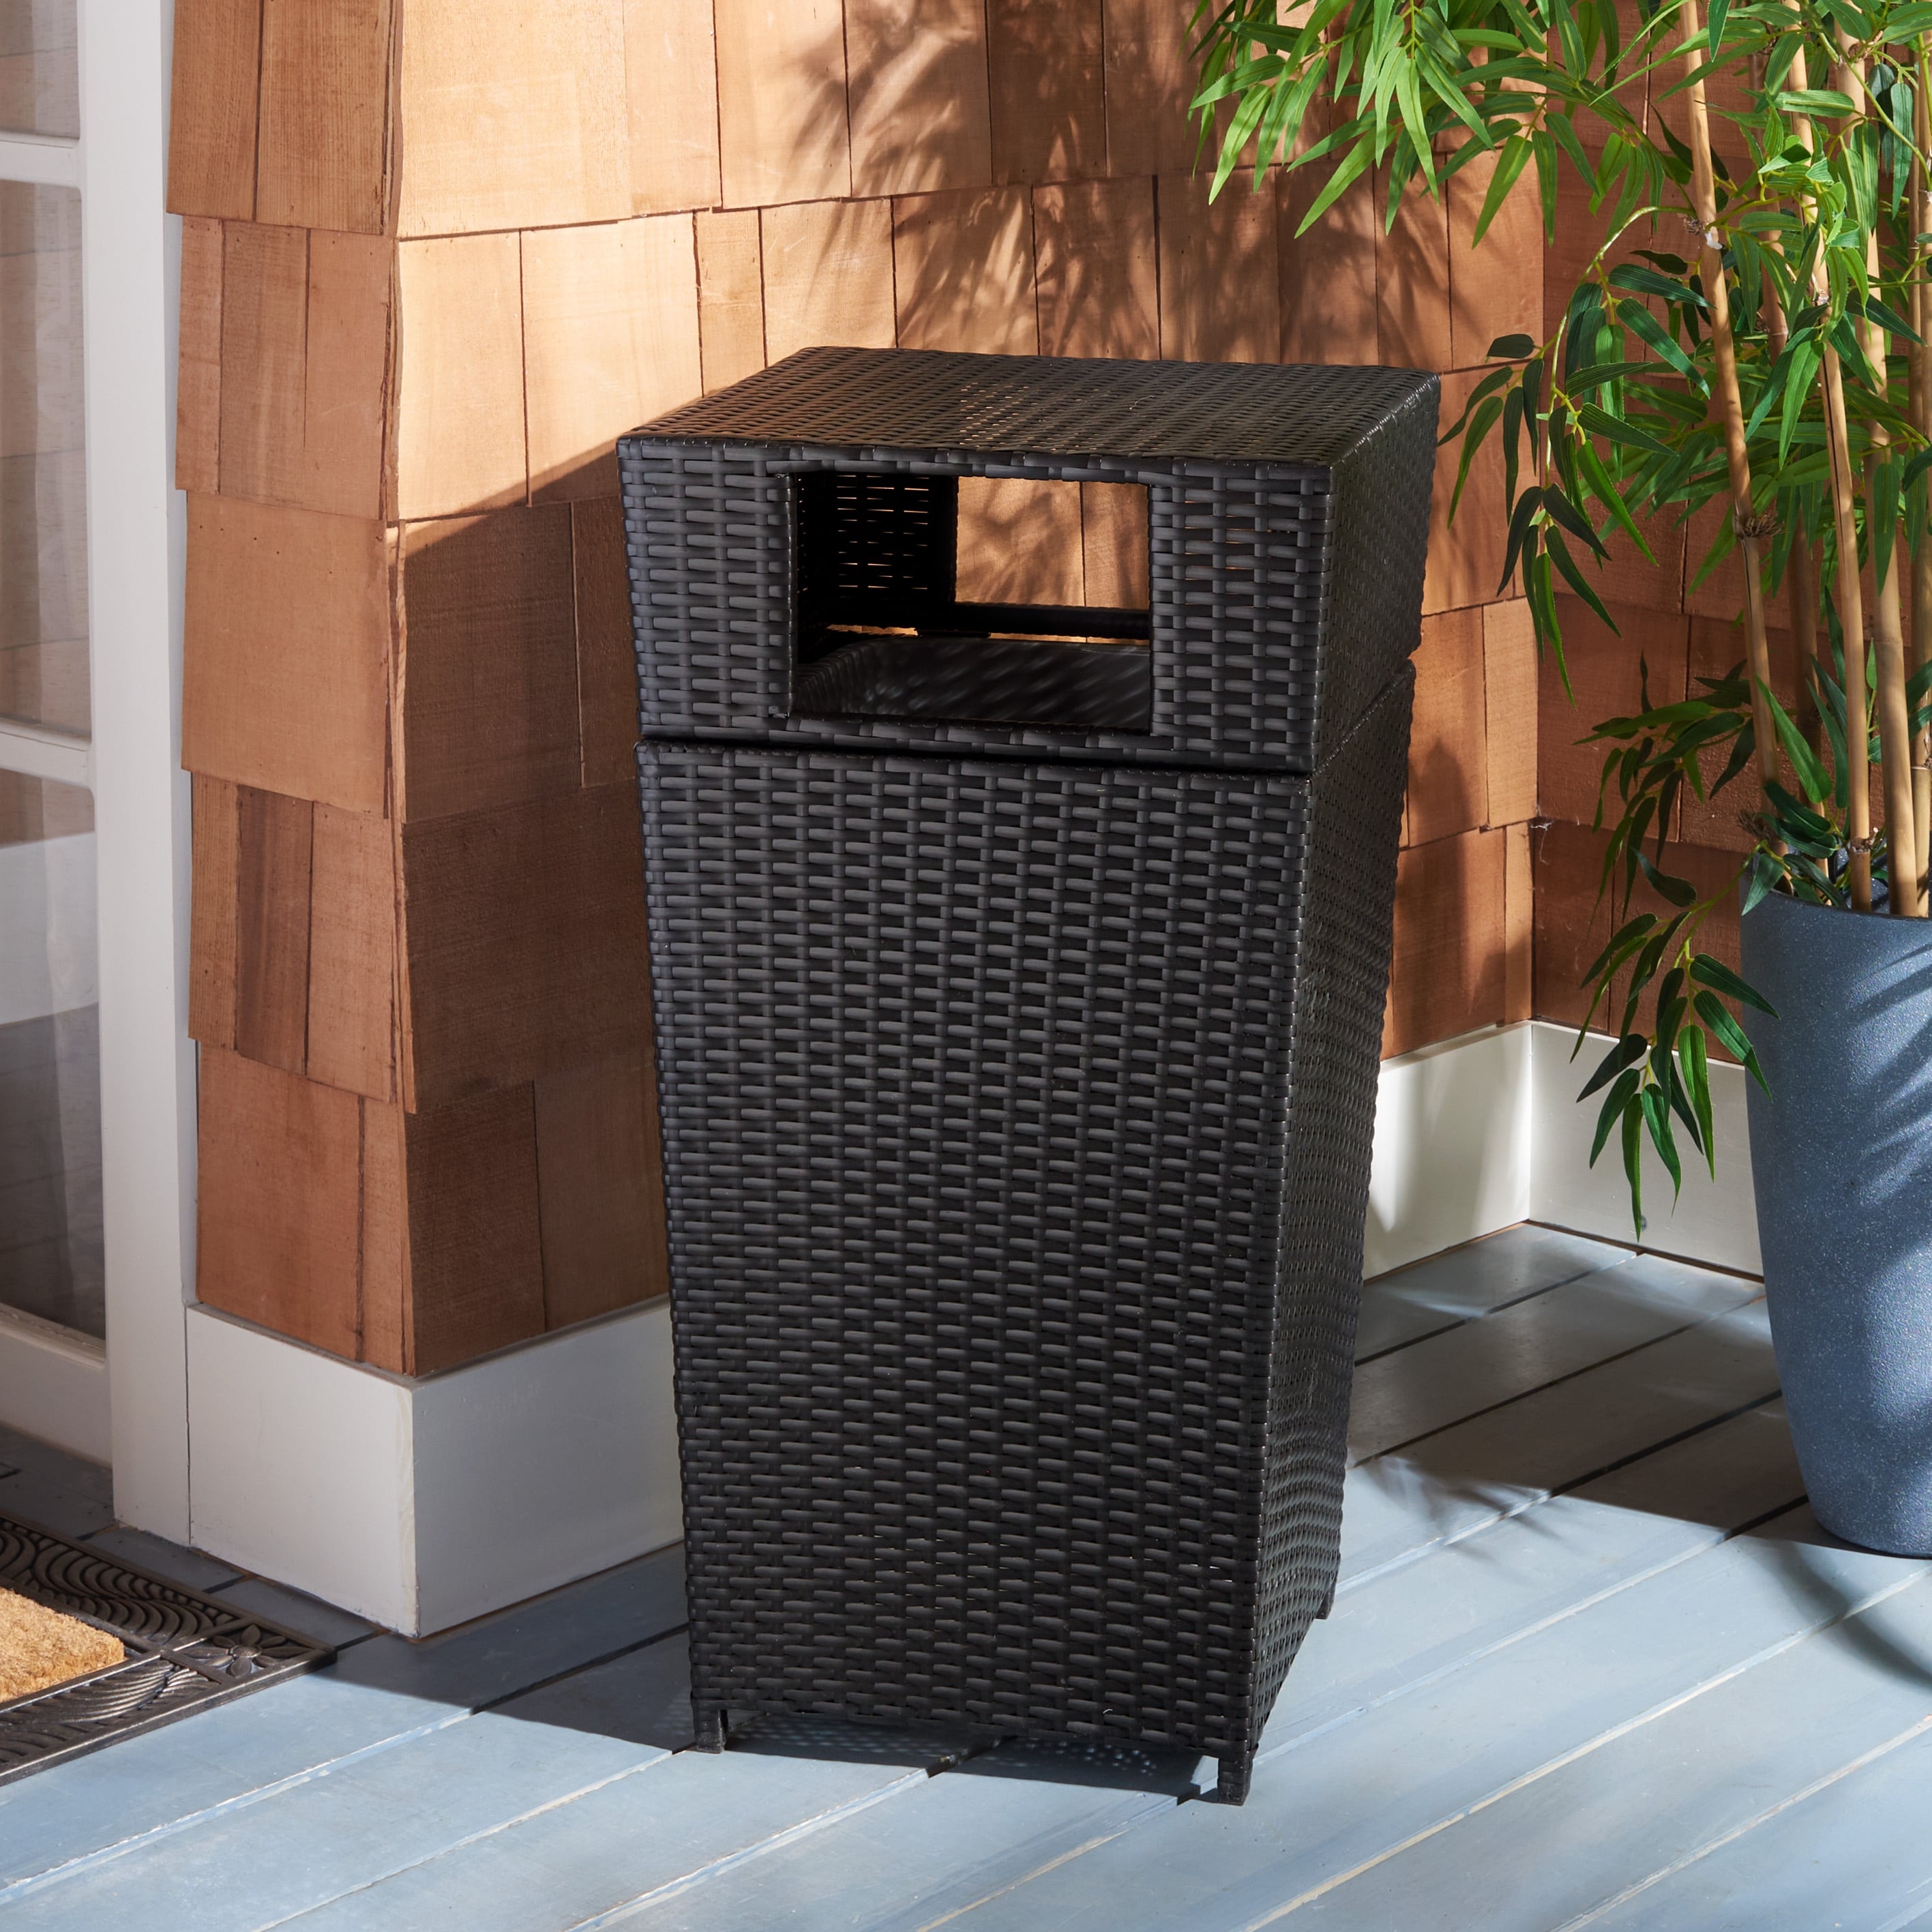 Nestl Outdoor Trash Can with Lid - 30 Gallon Durable Wicker